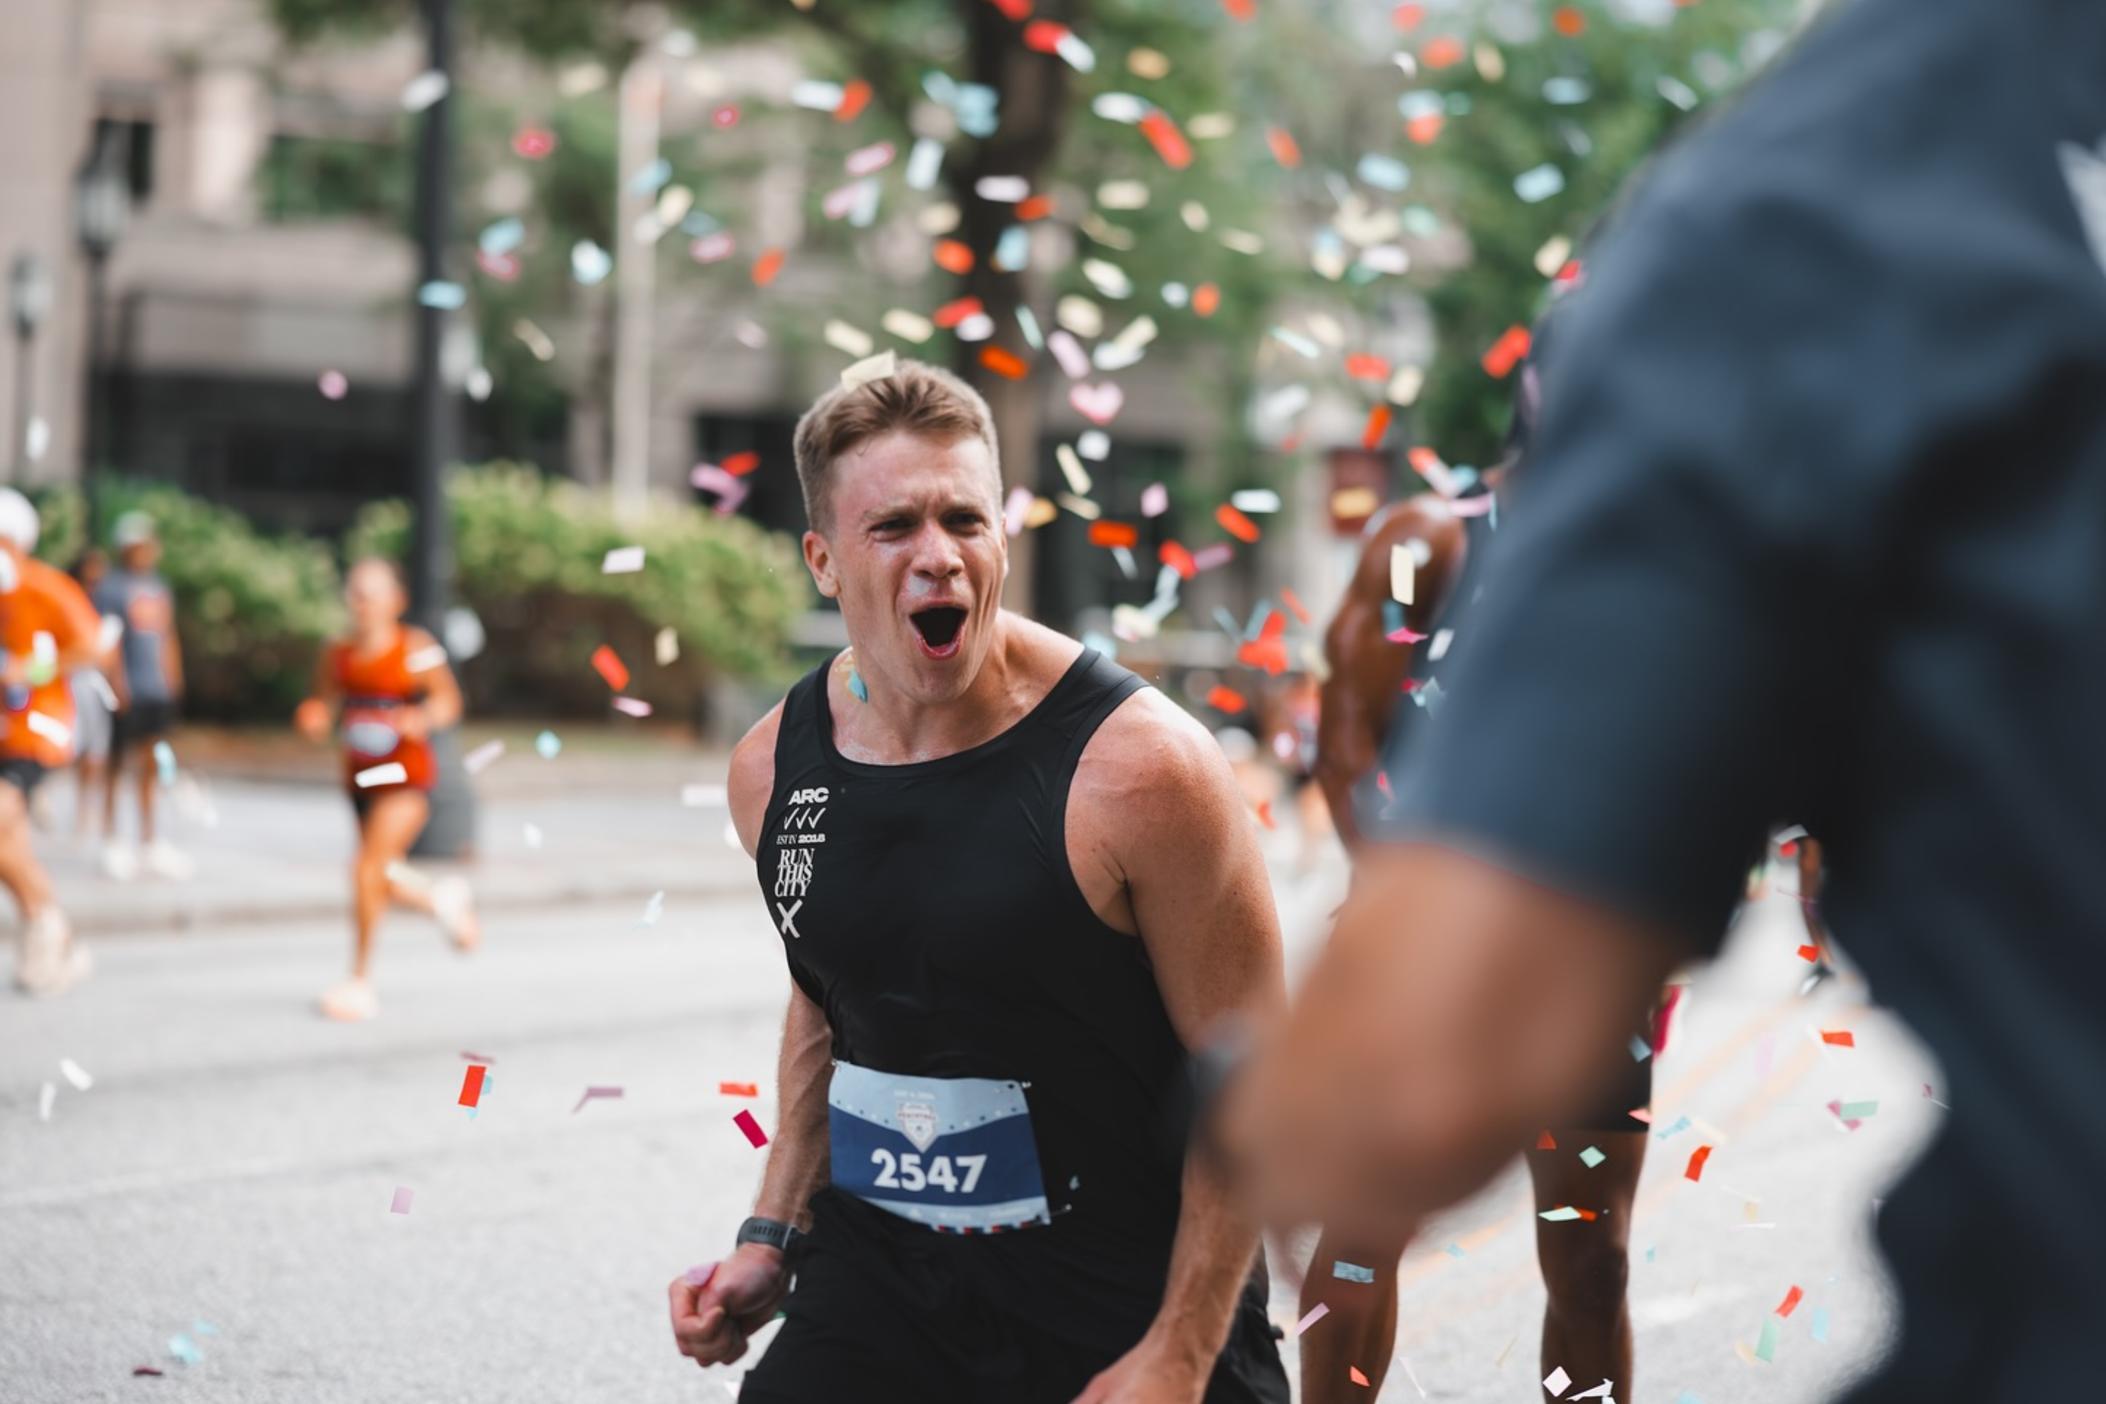 Zach Smith has been a member of the Atlanta Run Club for two years and ran his first Peachtree Road Race this year.